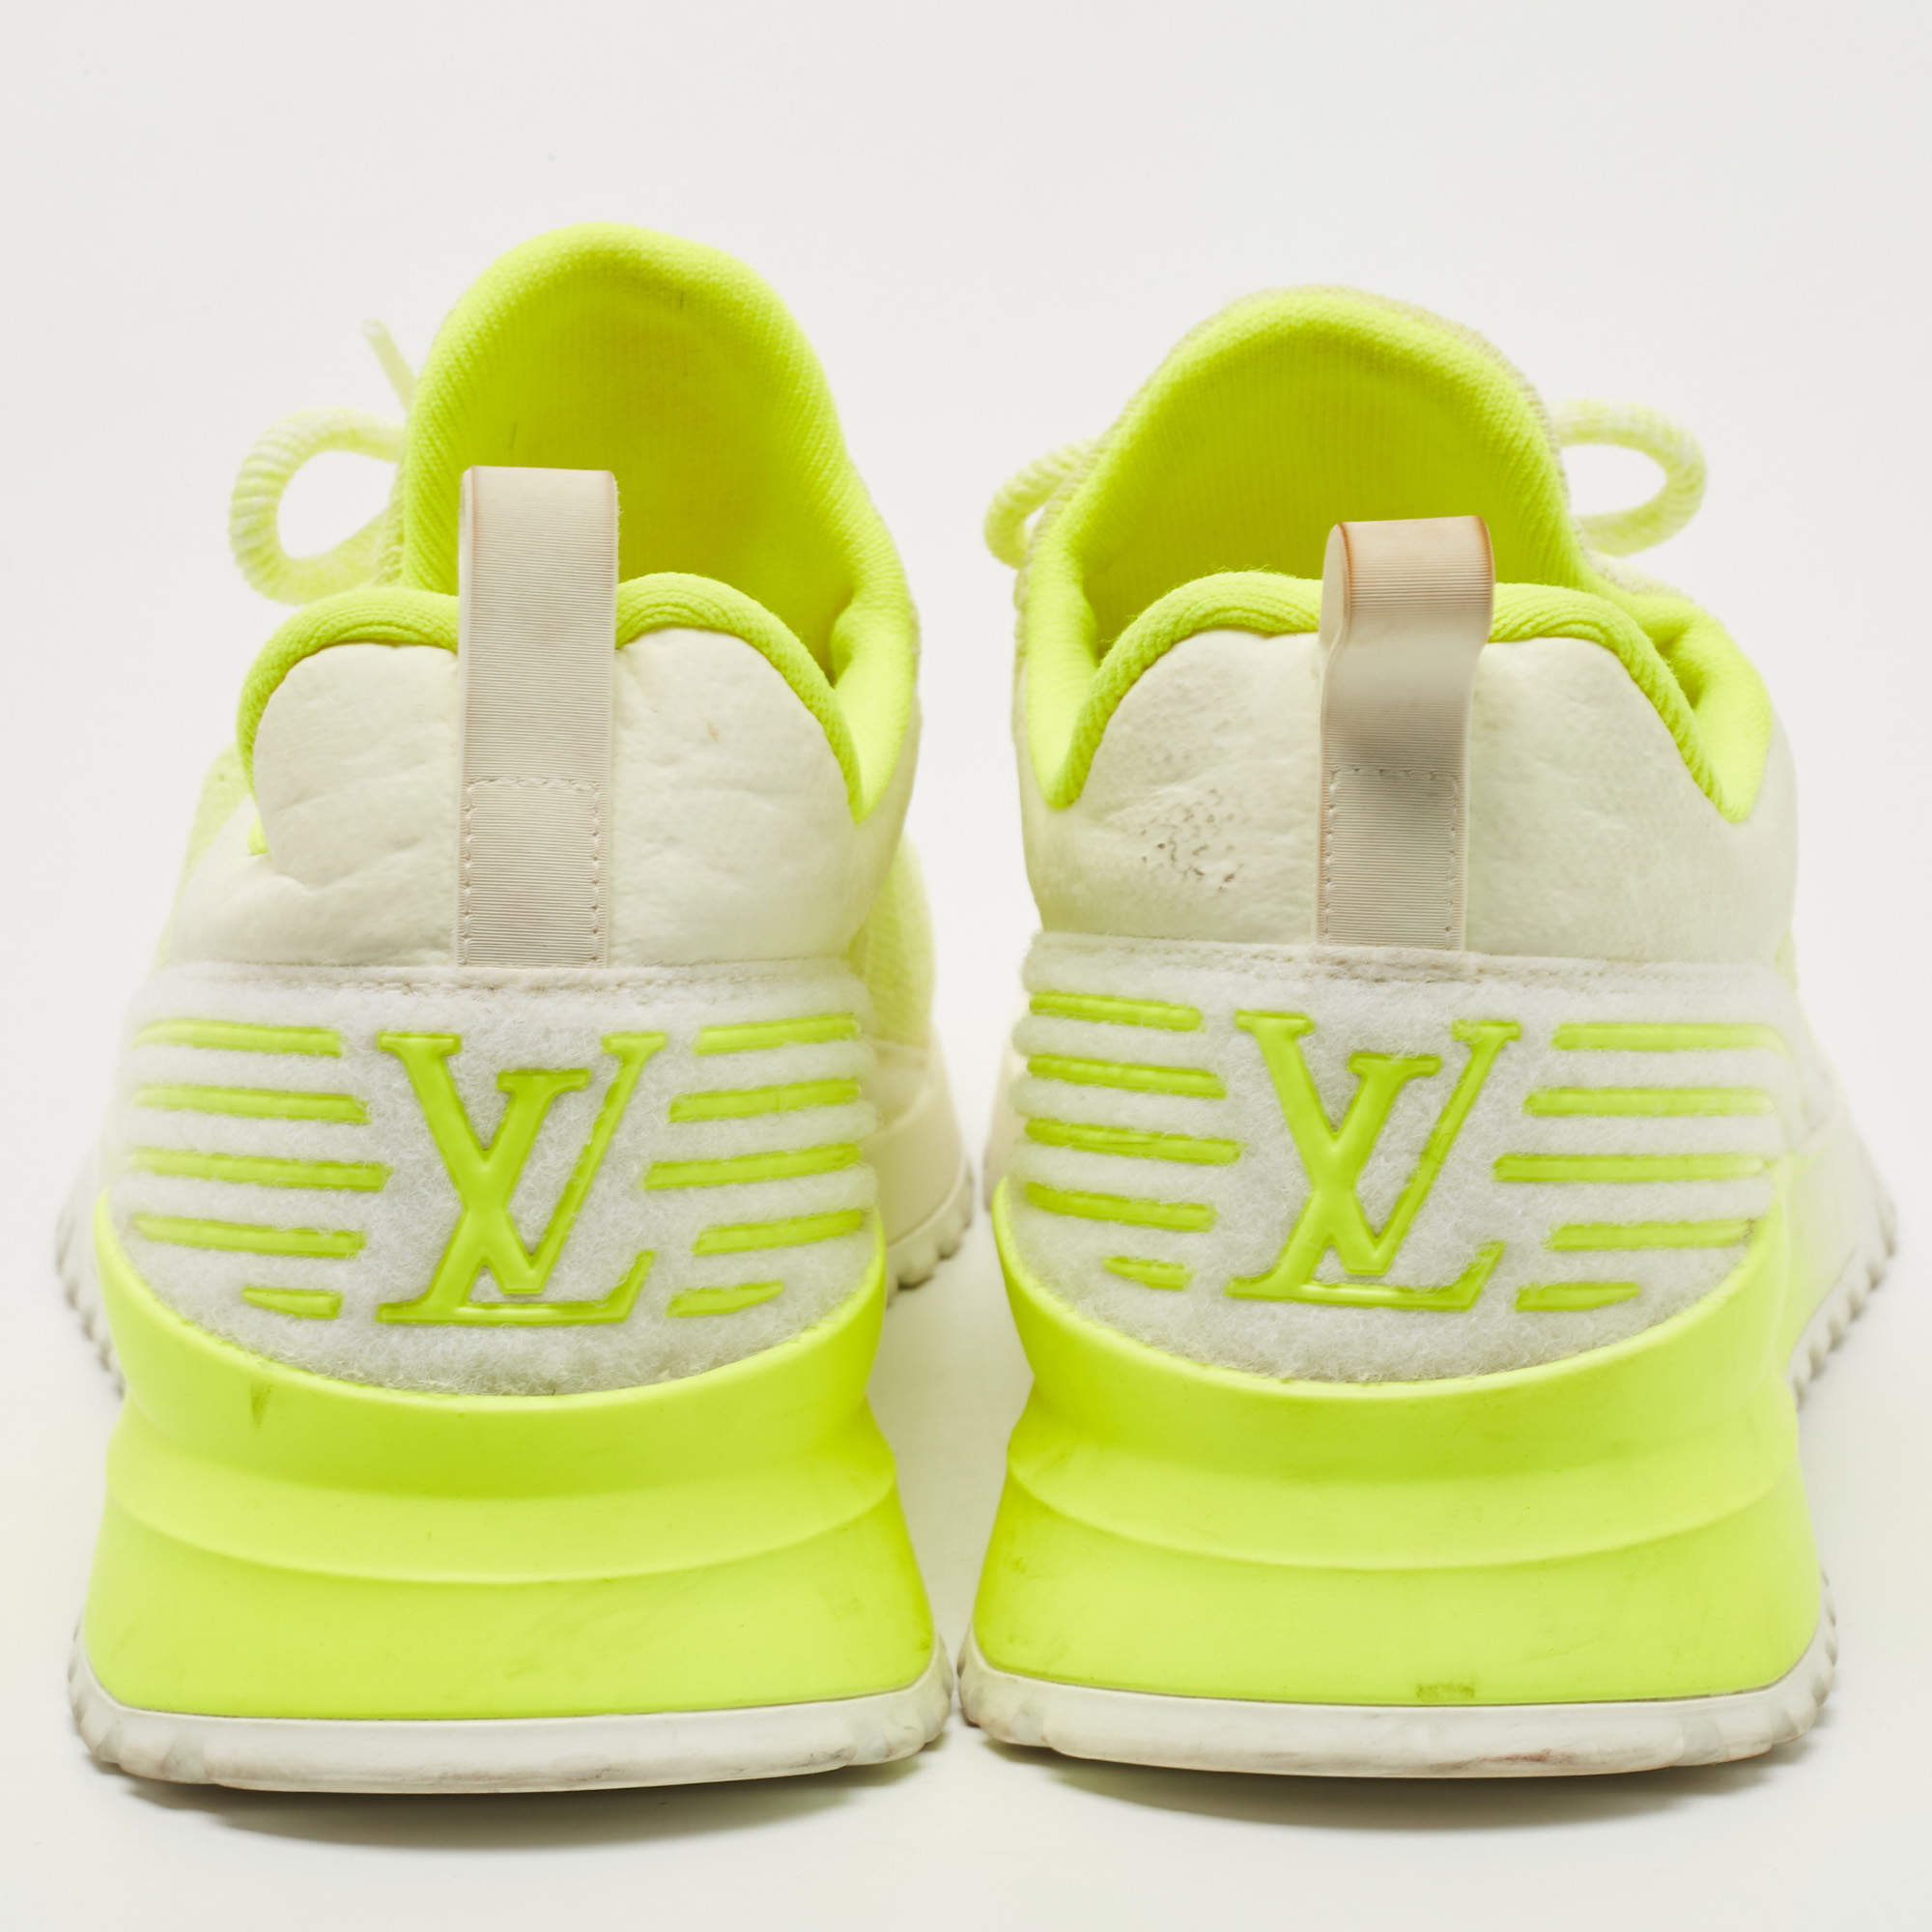 Louis Vuitton Neon Yellow Knit Fabric V.N.R Sneakers Size 42.5